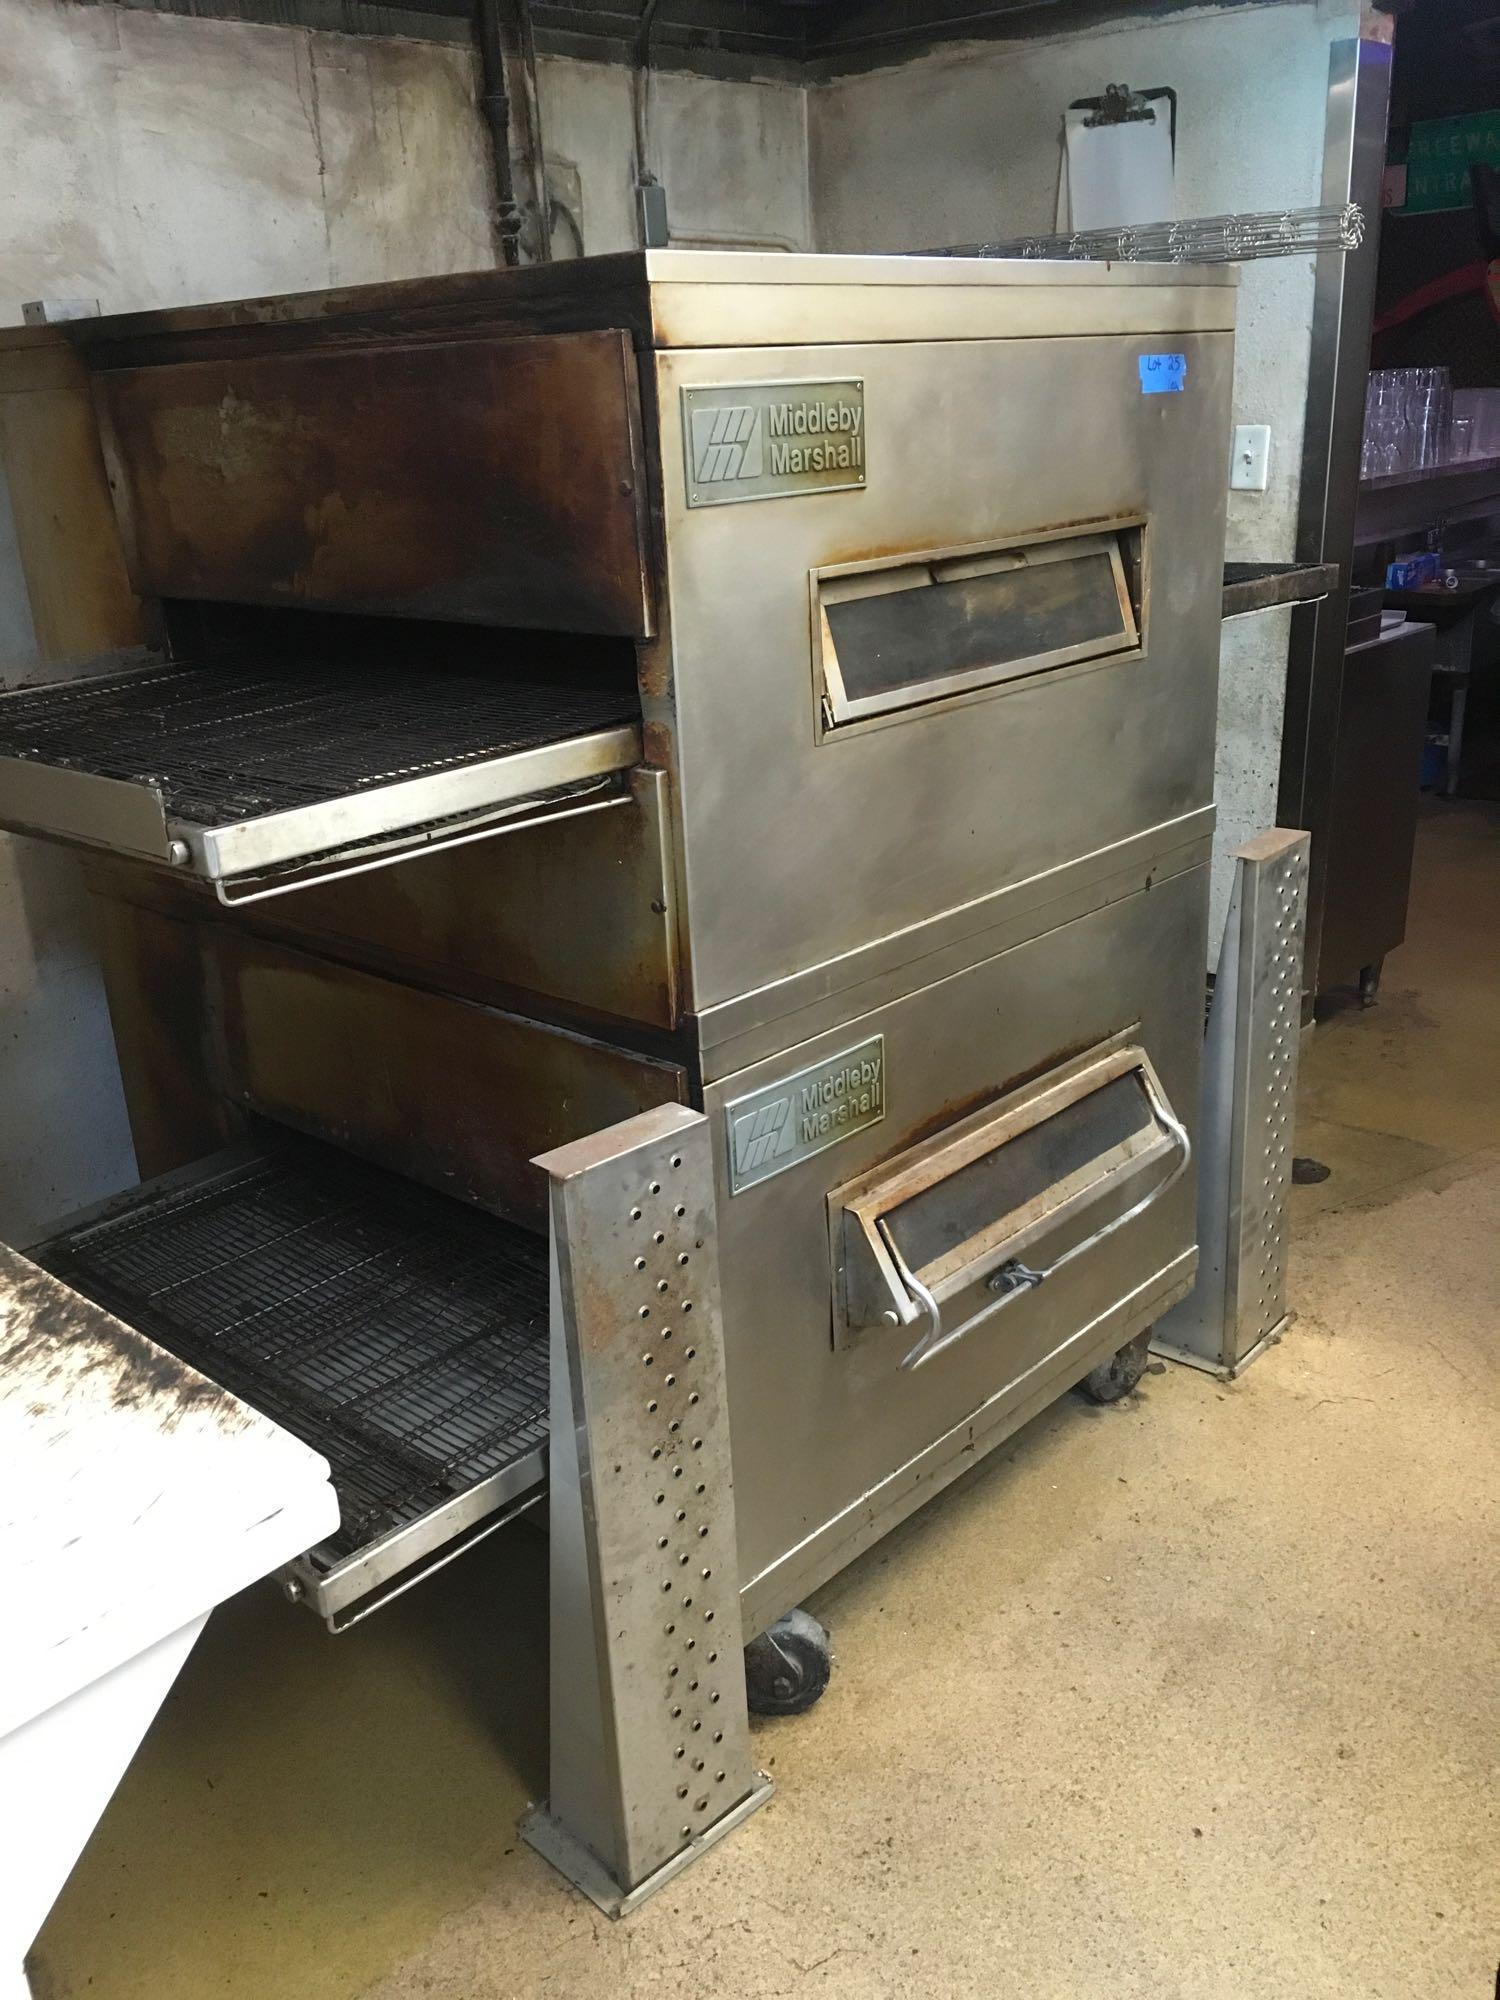 Middleby Marshall Pizza Oven model PS200, works, natural gas, on casters, 120 volt controls only